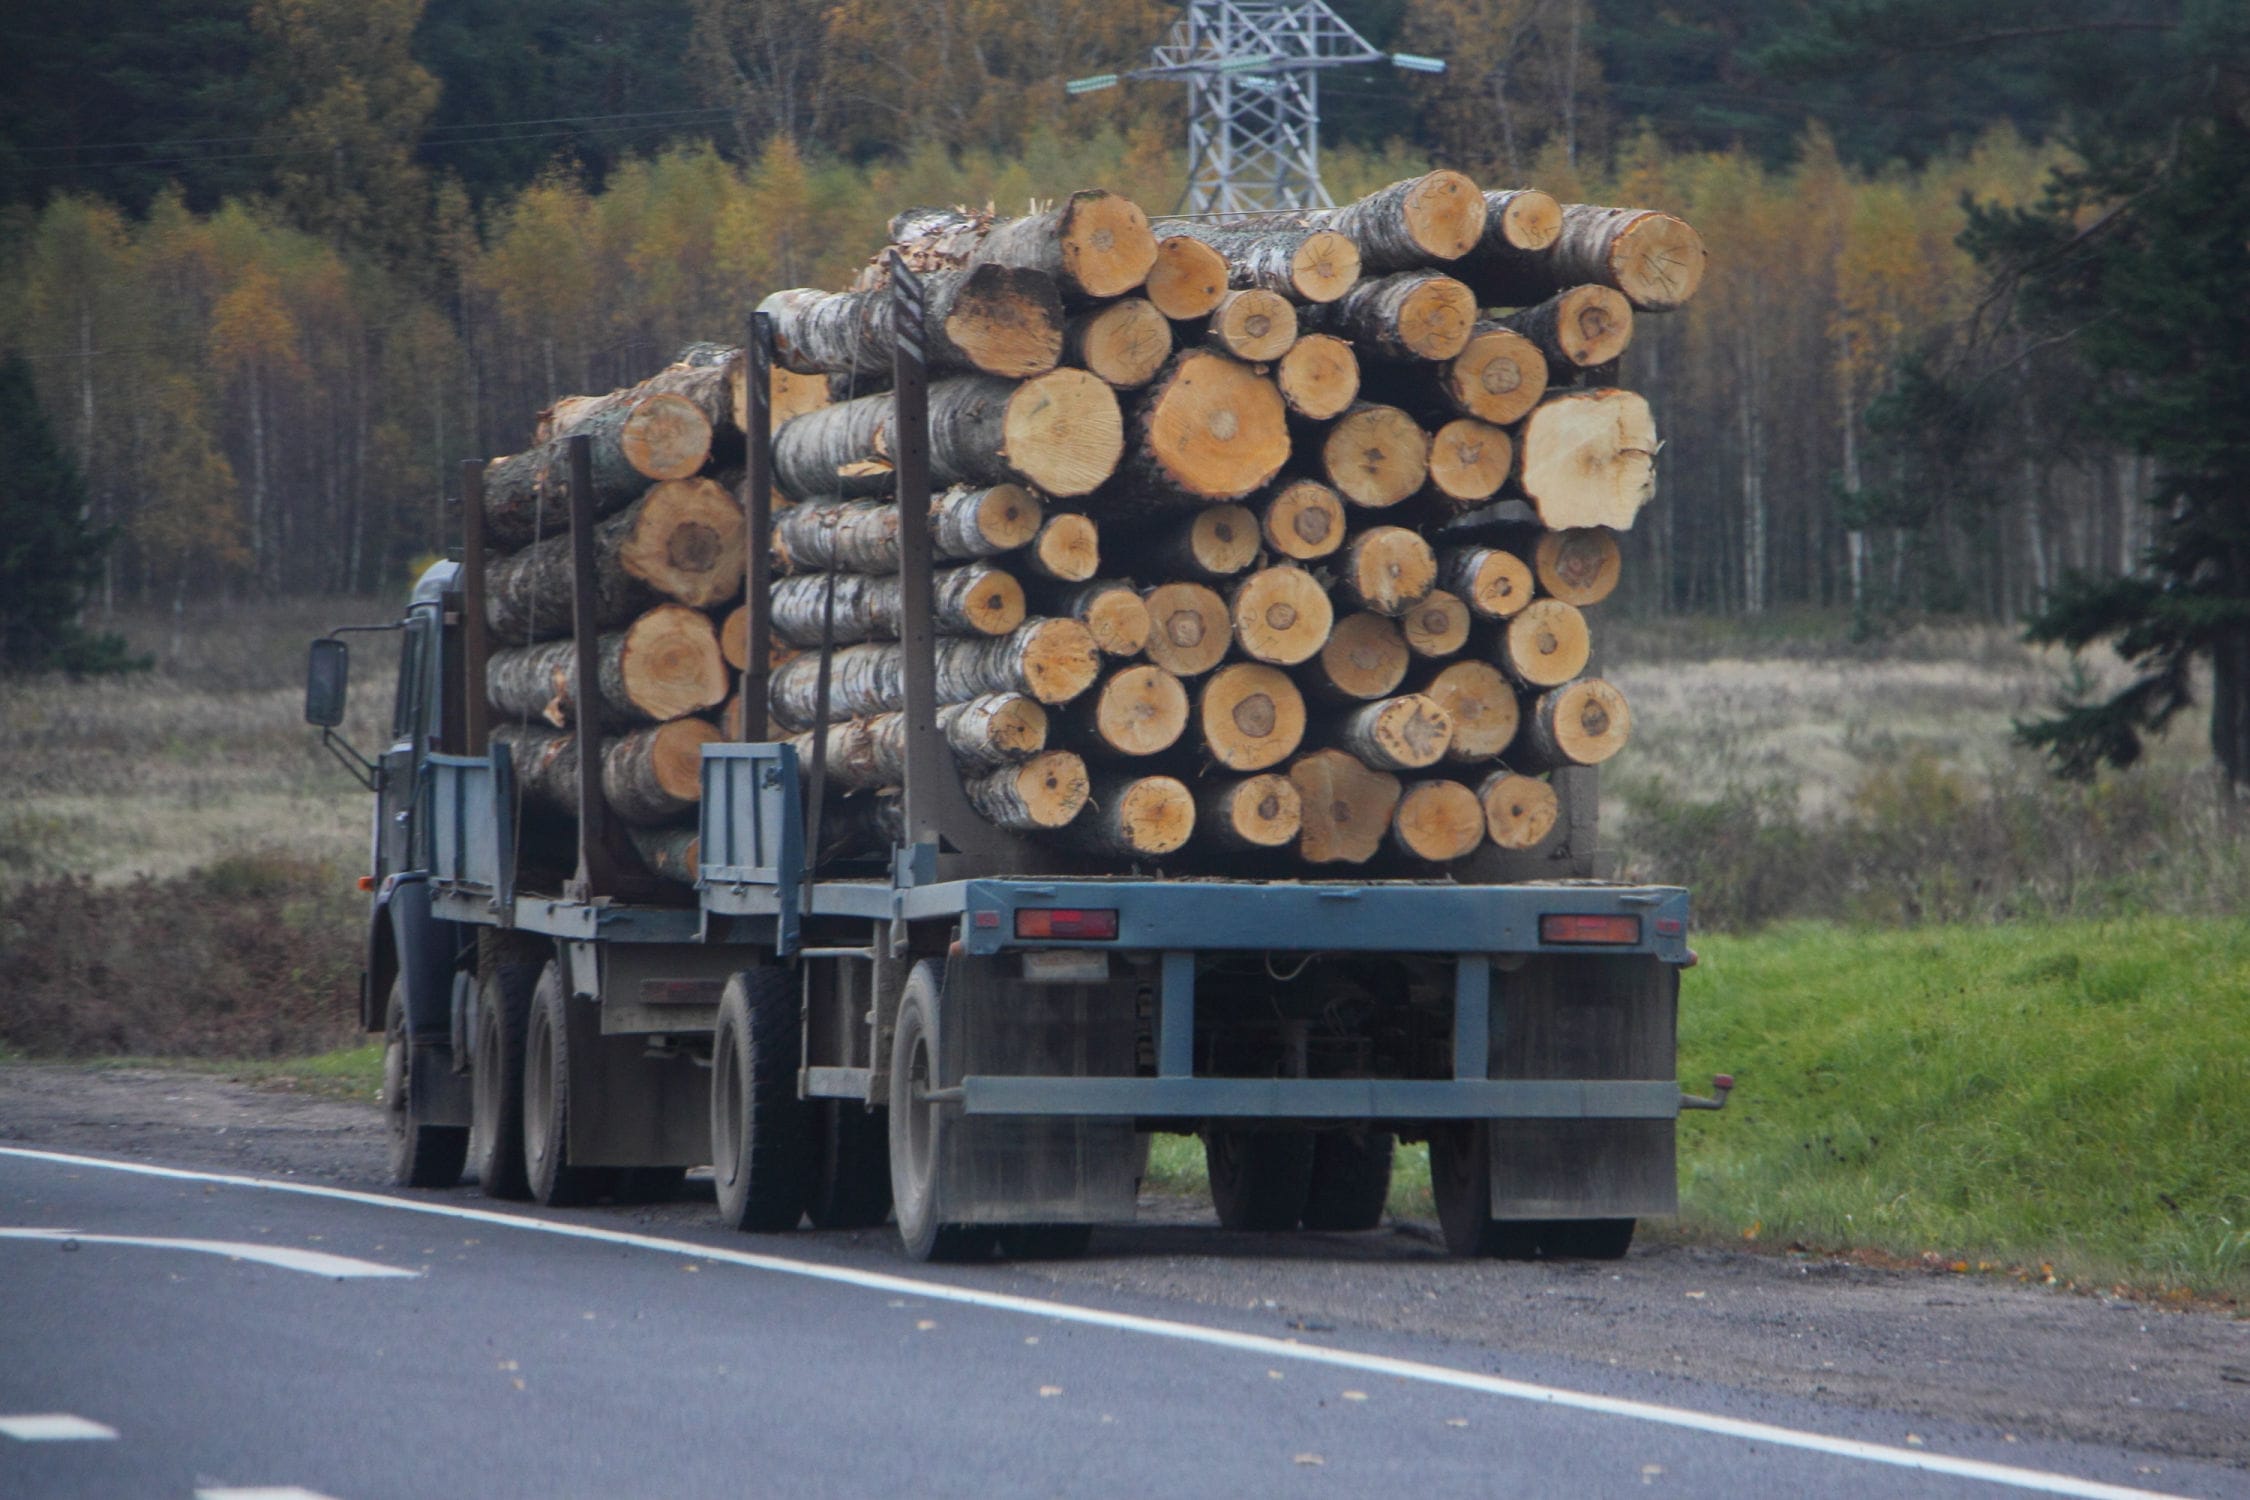 A logging truck filled with giant logs